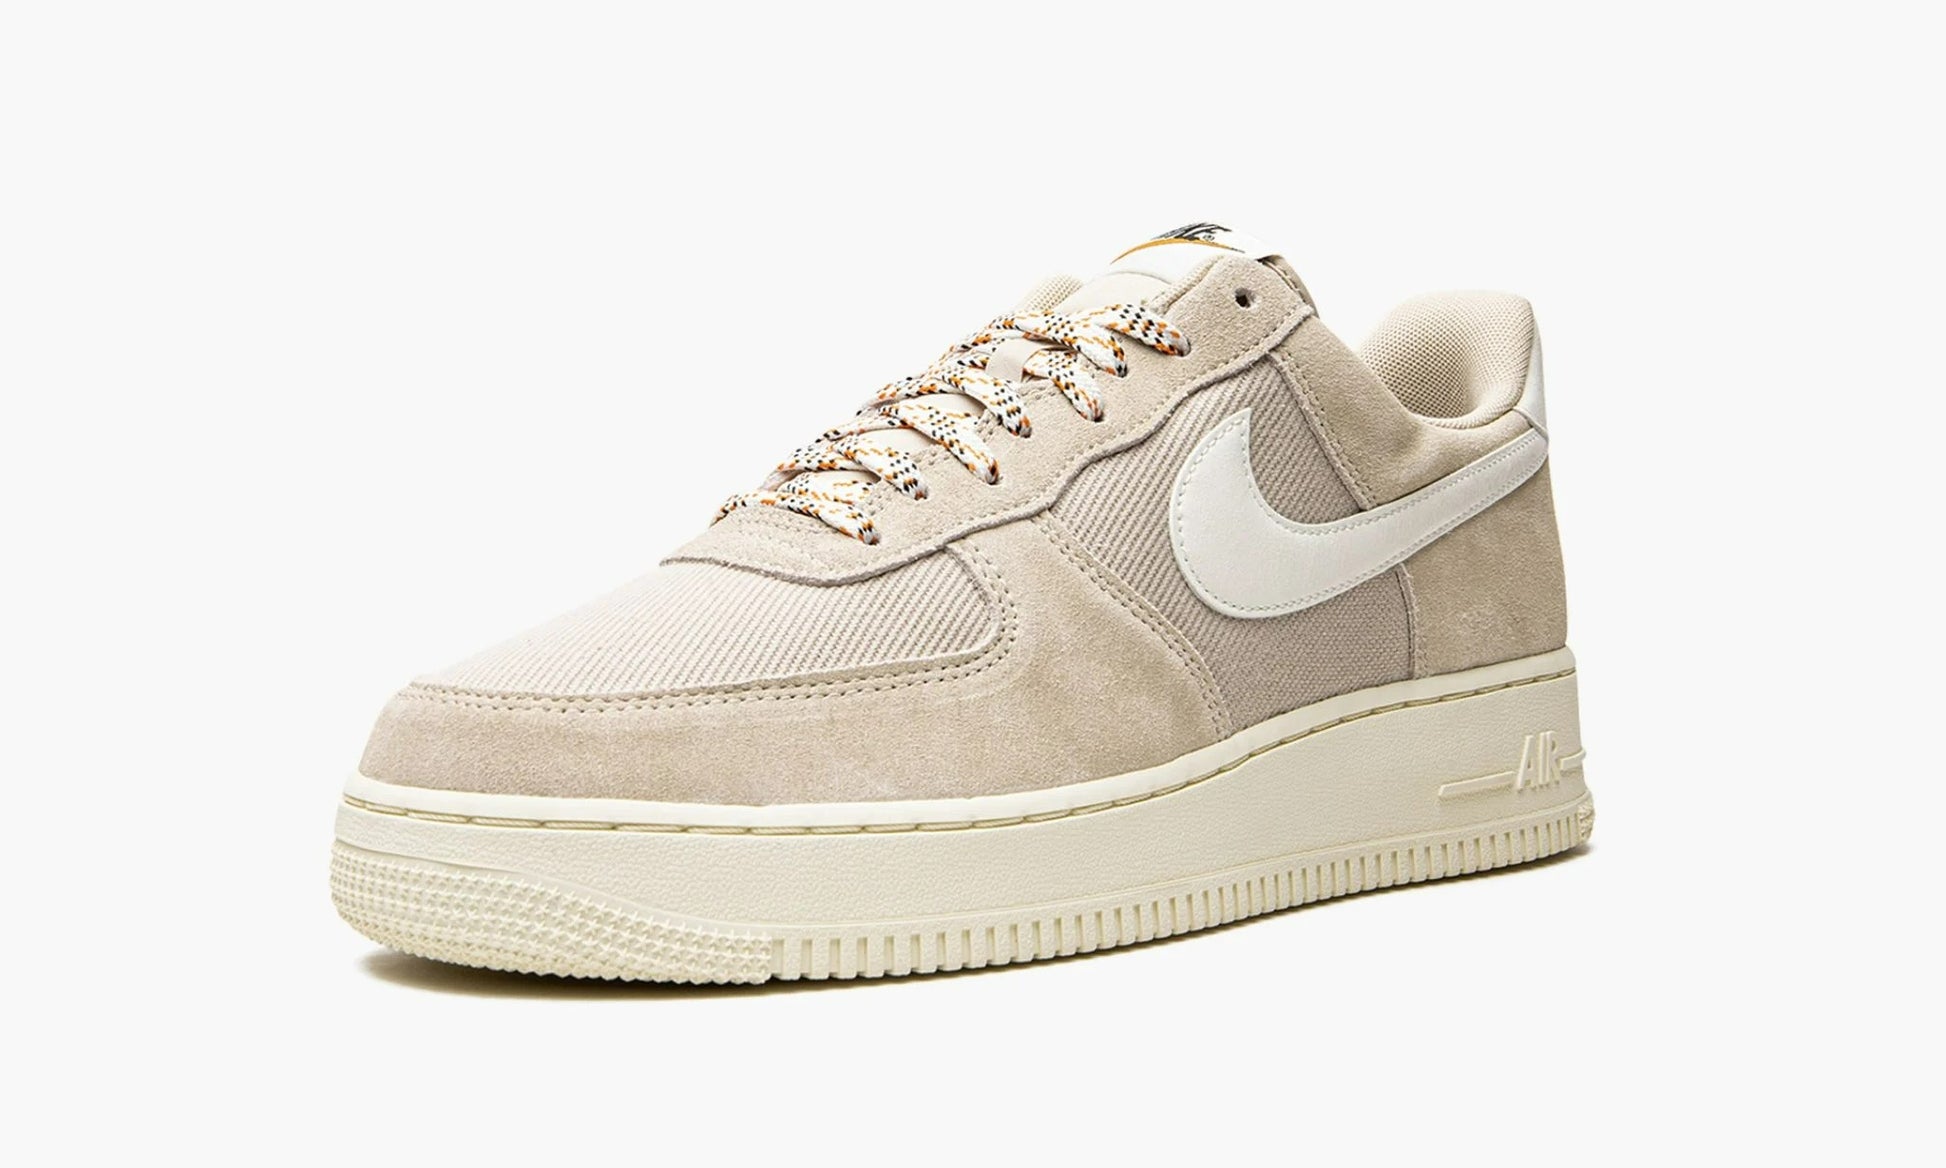 Air Force 1 Low '07 LV8 Certified Fresh Rattan - DO9801 200